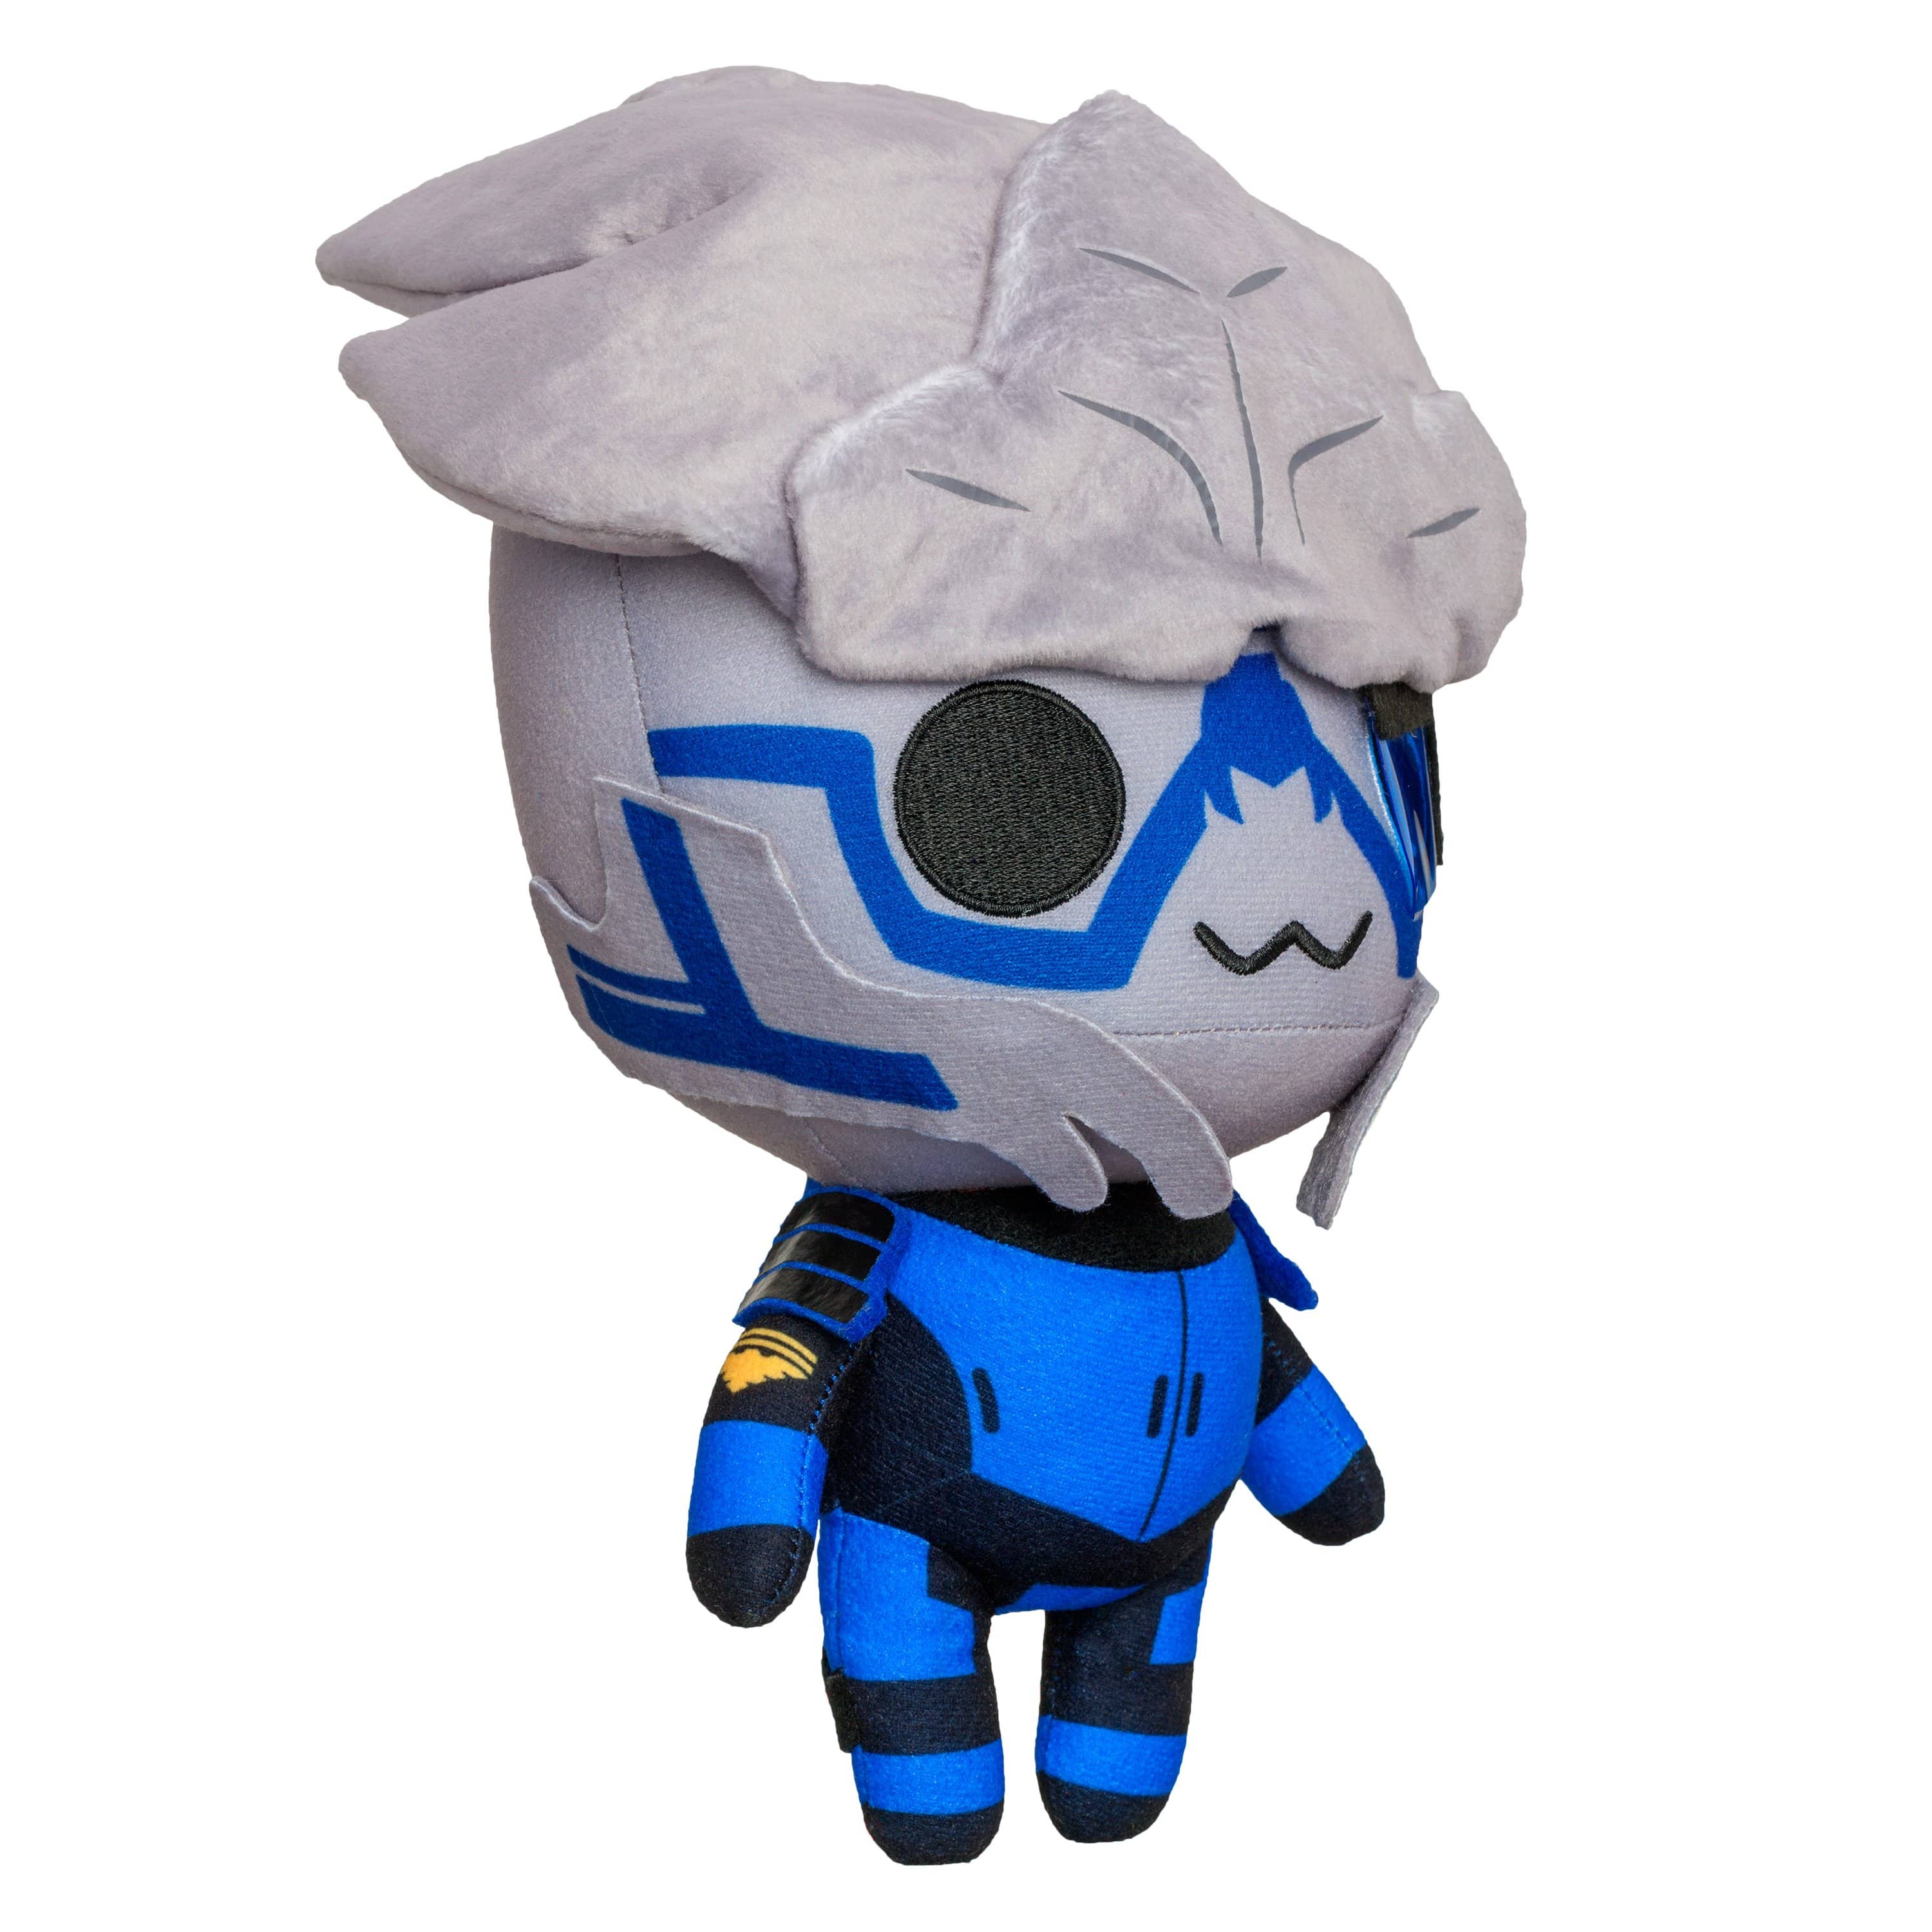 Mass Effect - 11" Garrus Collector's Stuffed Plush Toy Side View